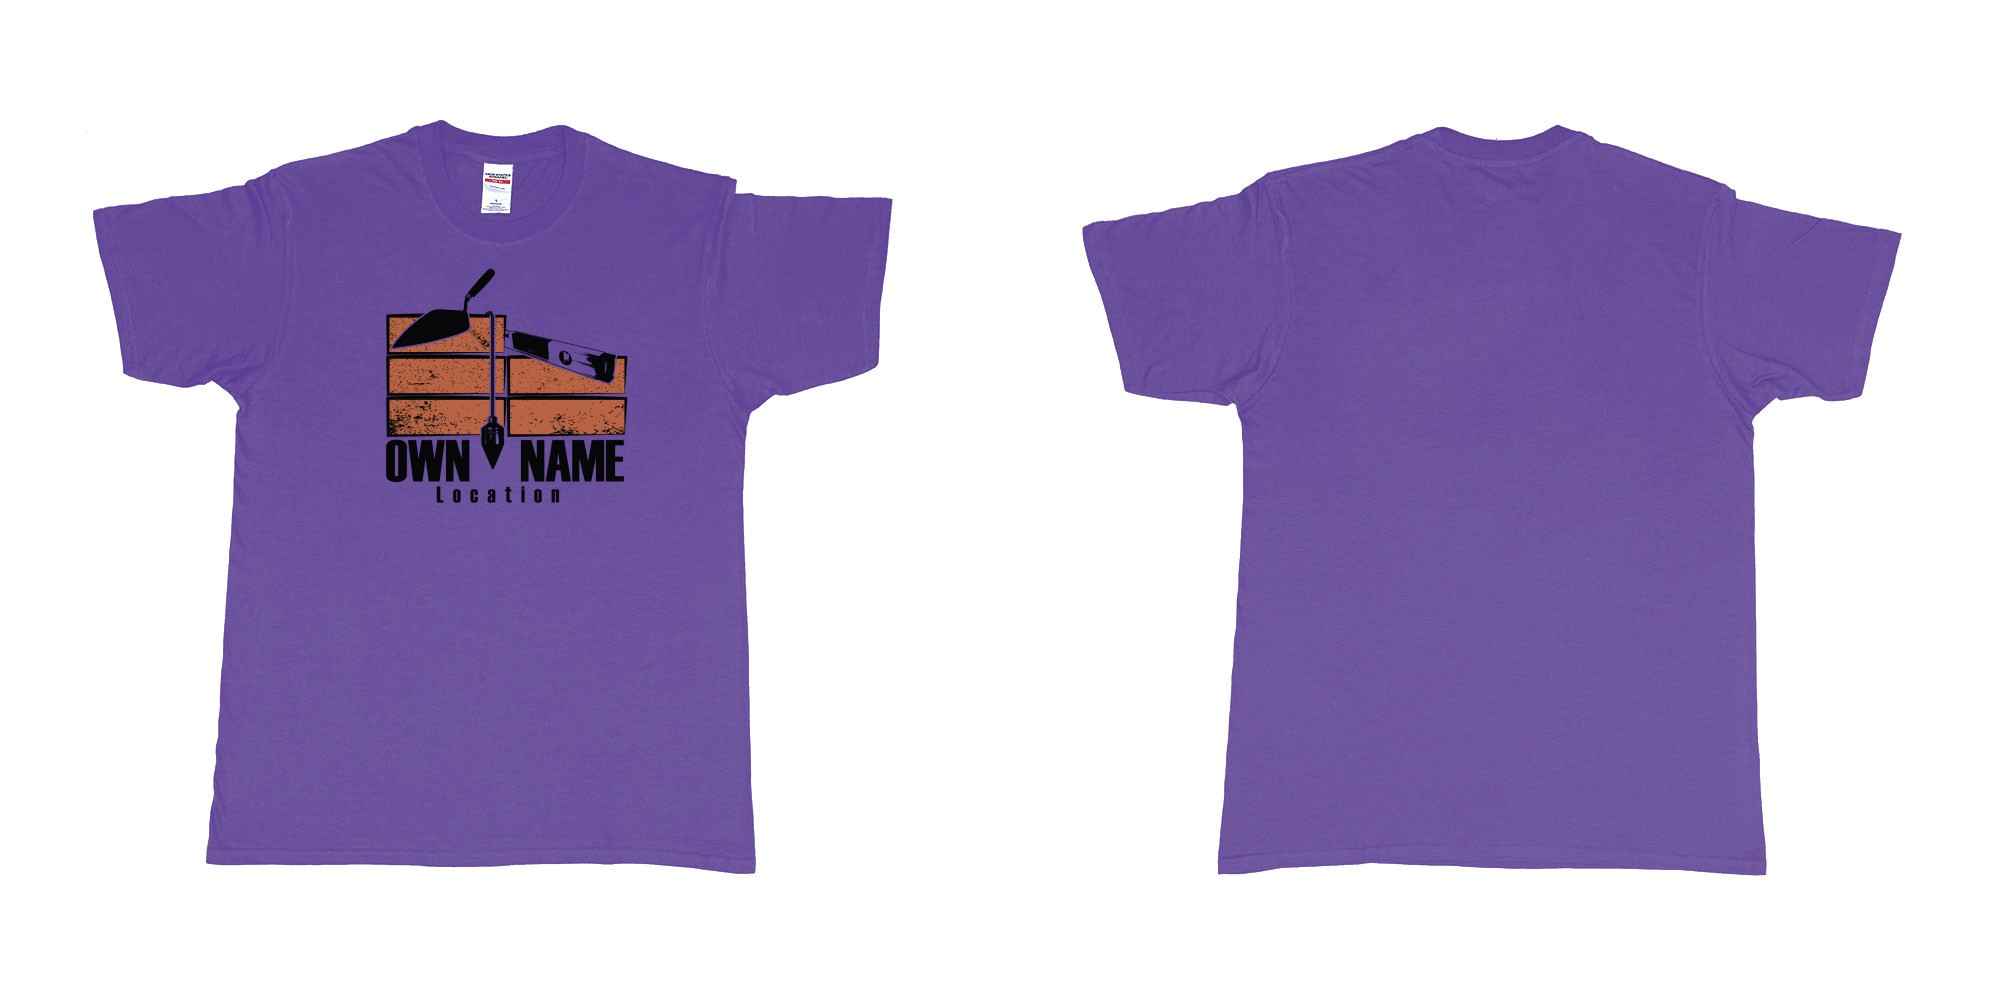 Custom tshirt design brick layer builder own custom company printing name location trowel in fabric color purple choice your own text made in Bali by The Pirate Way